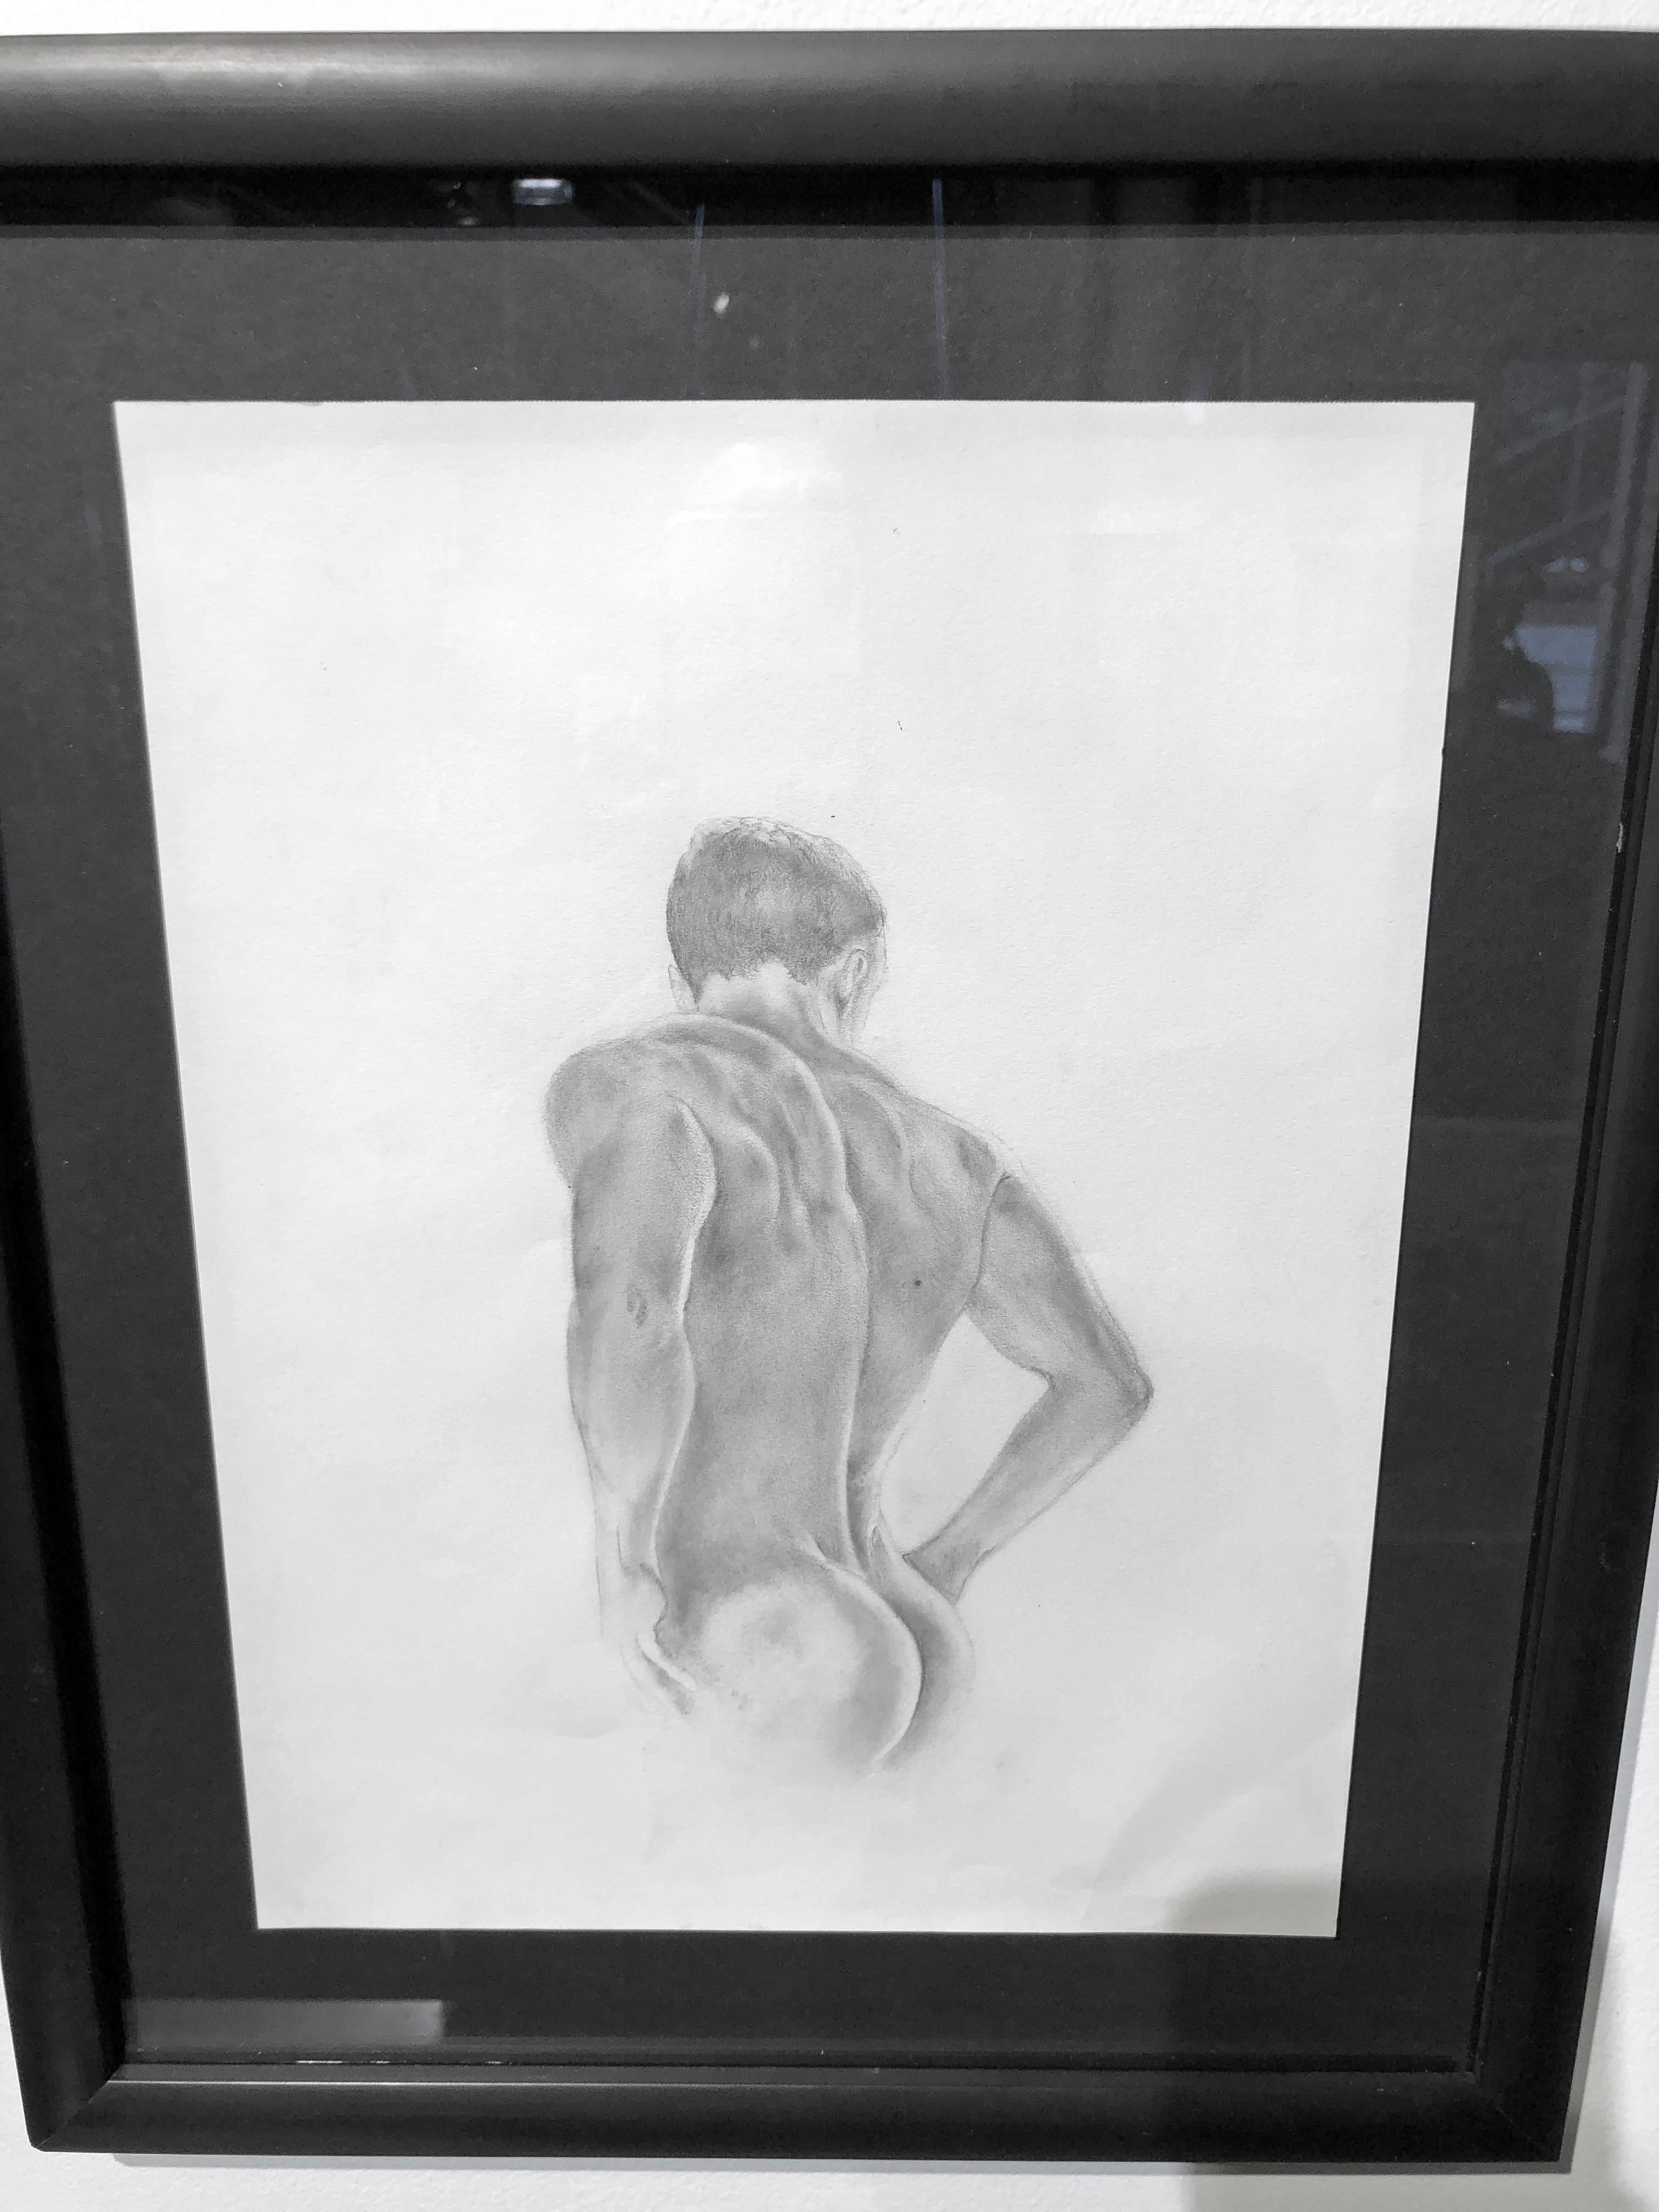 Rick Sindt's knowledge of the male physique is evident in this exquisite drawing of a nude male.  The subject, with his back to us,  stands with his hands on his hips gazing down at something unknown.  We are only privy to the beautifully muscled